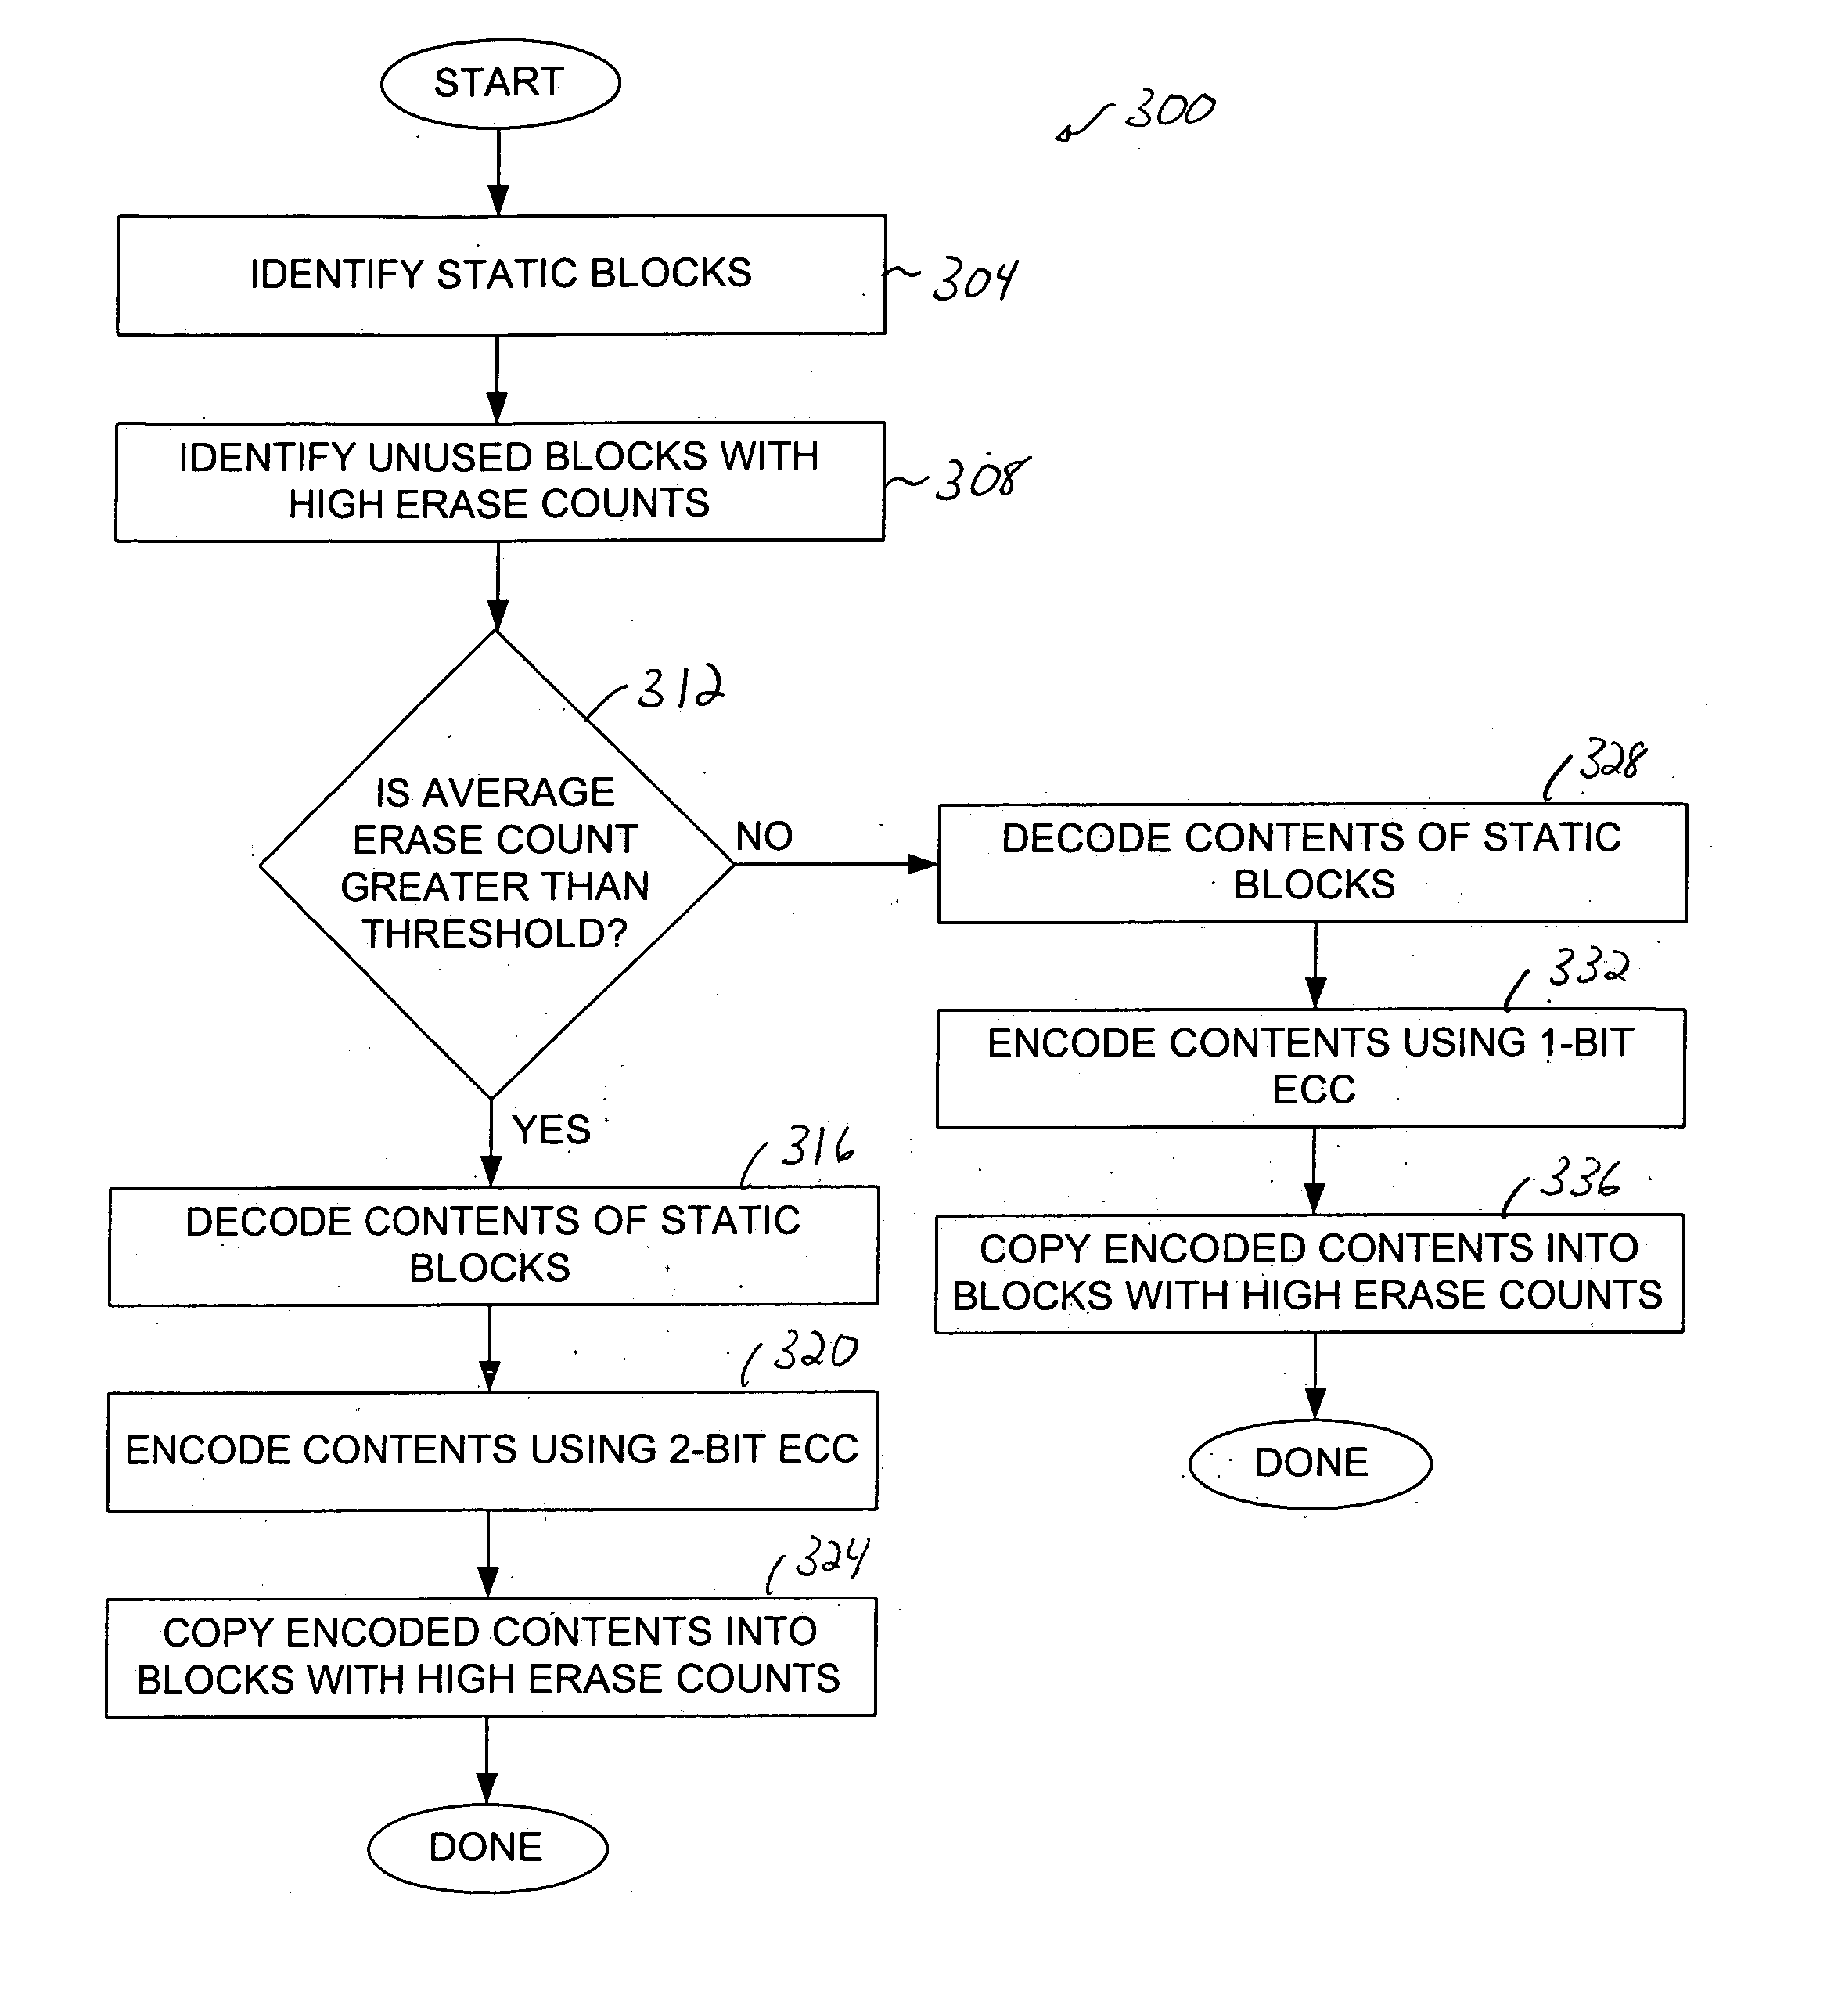 Hybrid implementation for error correction codes within a non-volatile memory system